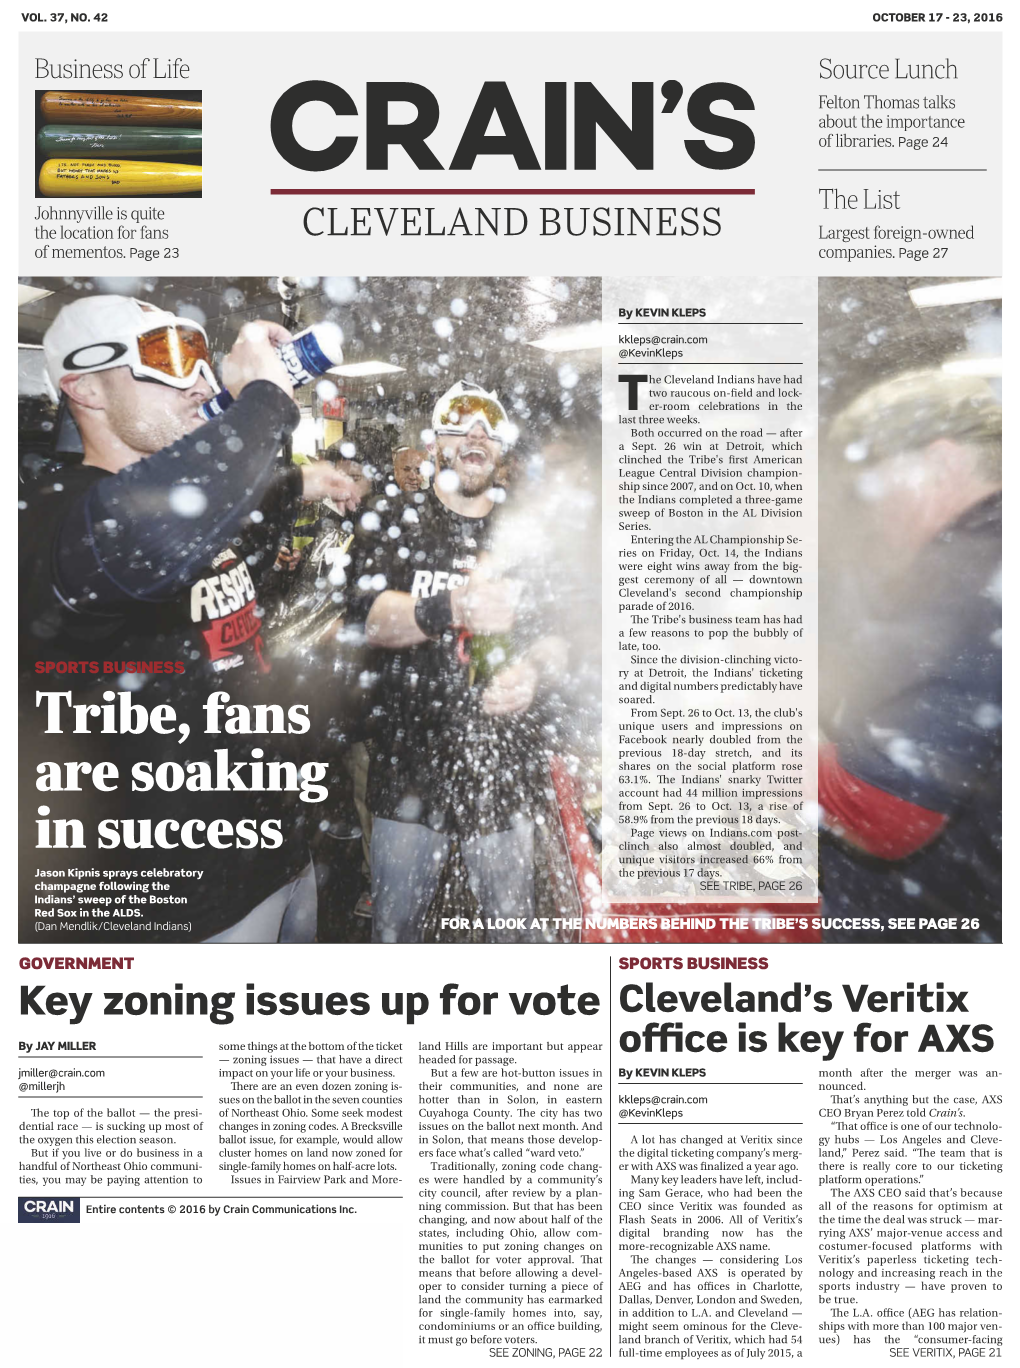 Tribe, Fans Are Soaking in Success